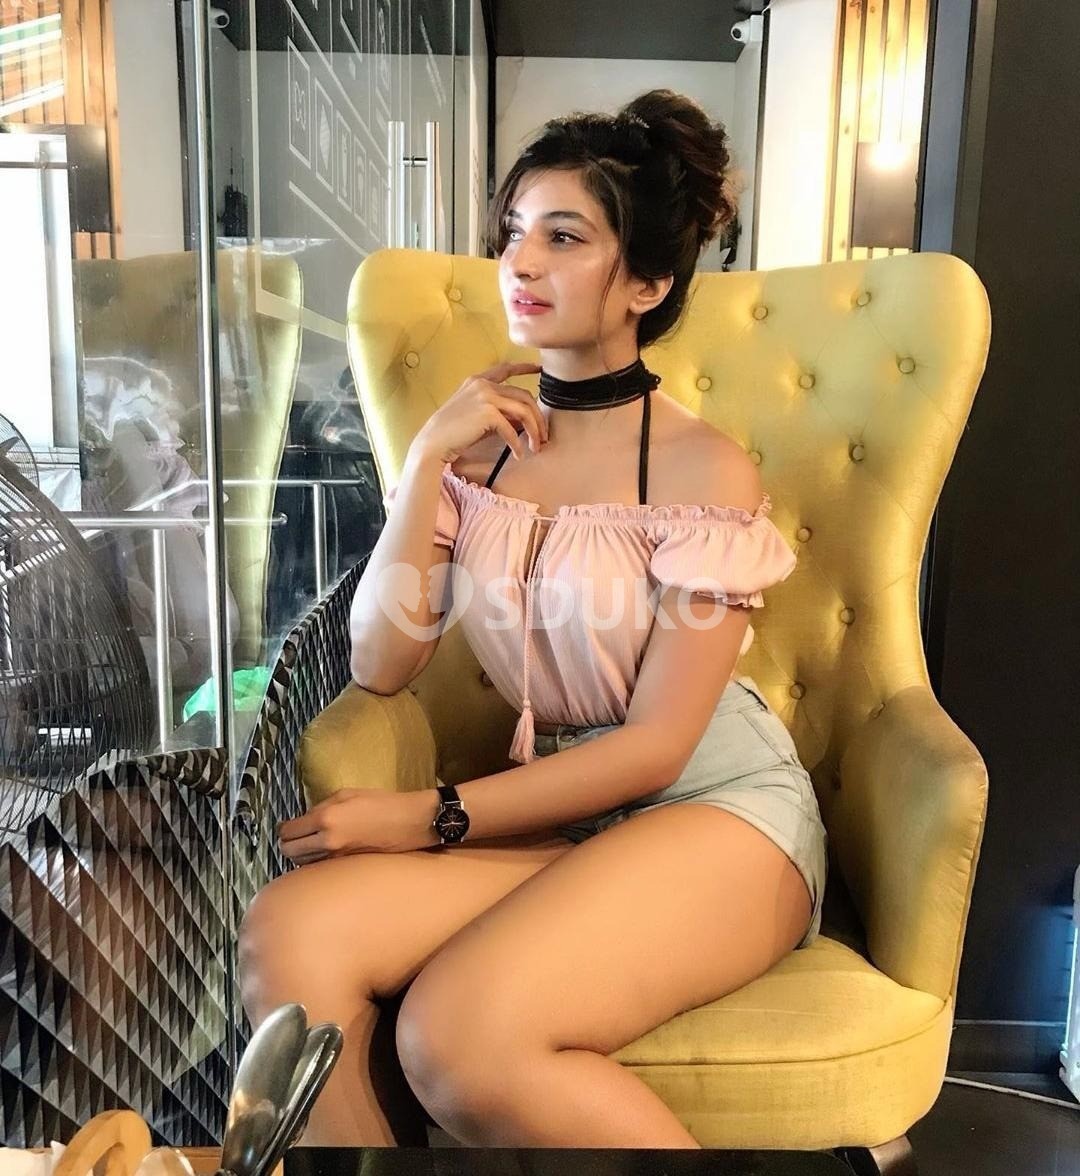 Sweety Delhi Escorts 100% Genuine High Class Independent Escorts Sarvice premium top class quality Available 24hr